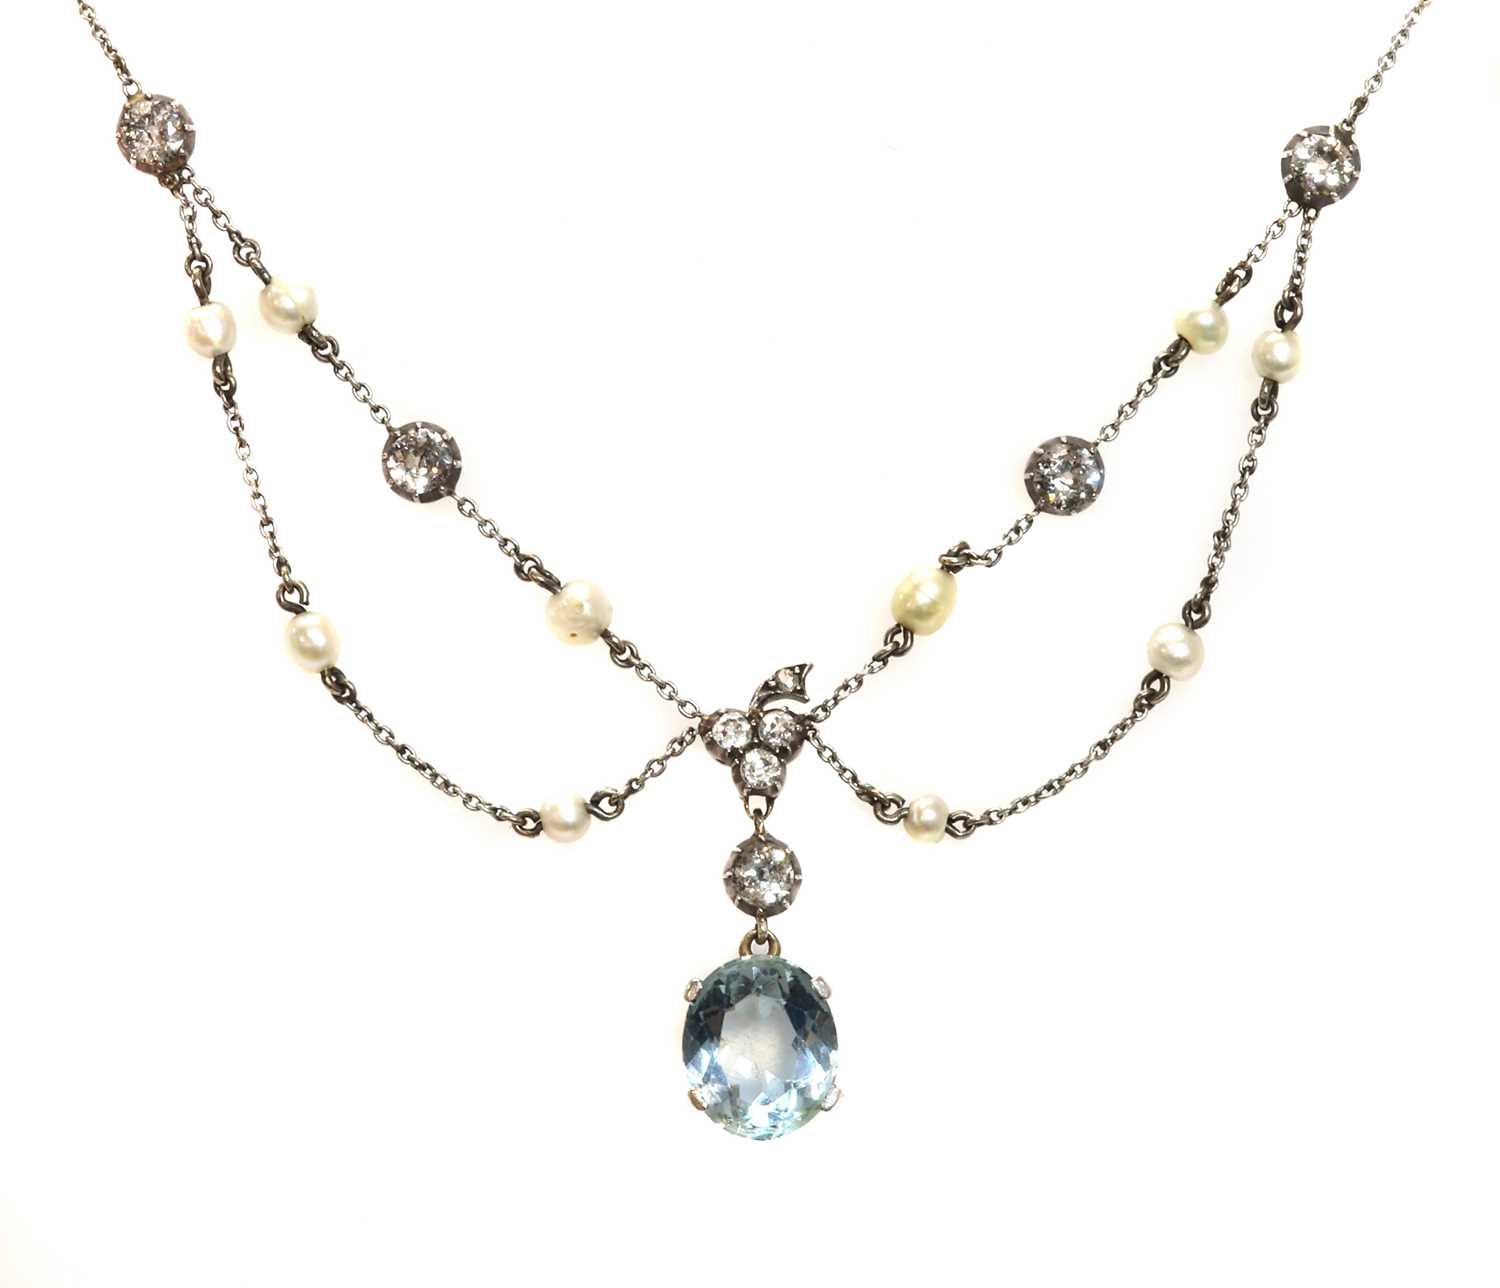 Lot 110 - An Edwardian aquamarine, diamond and pearl swag necklace, c.1910